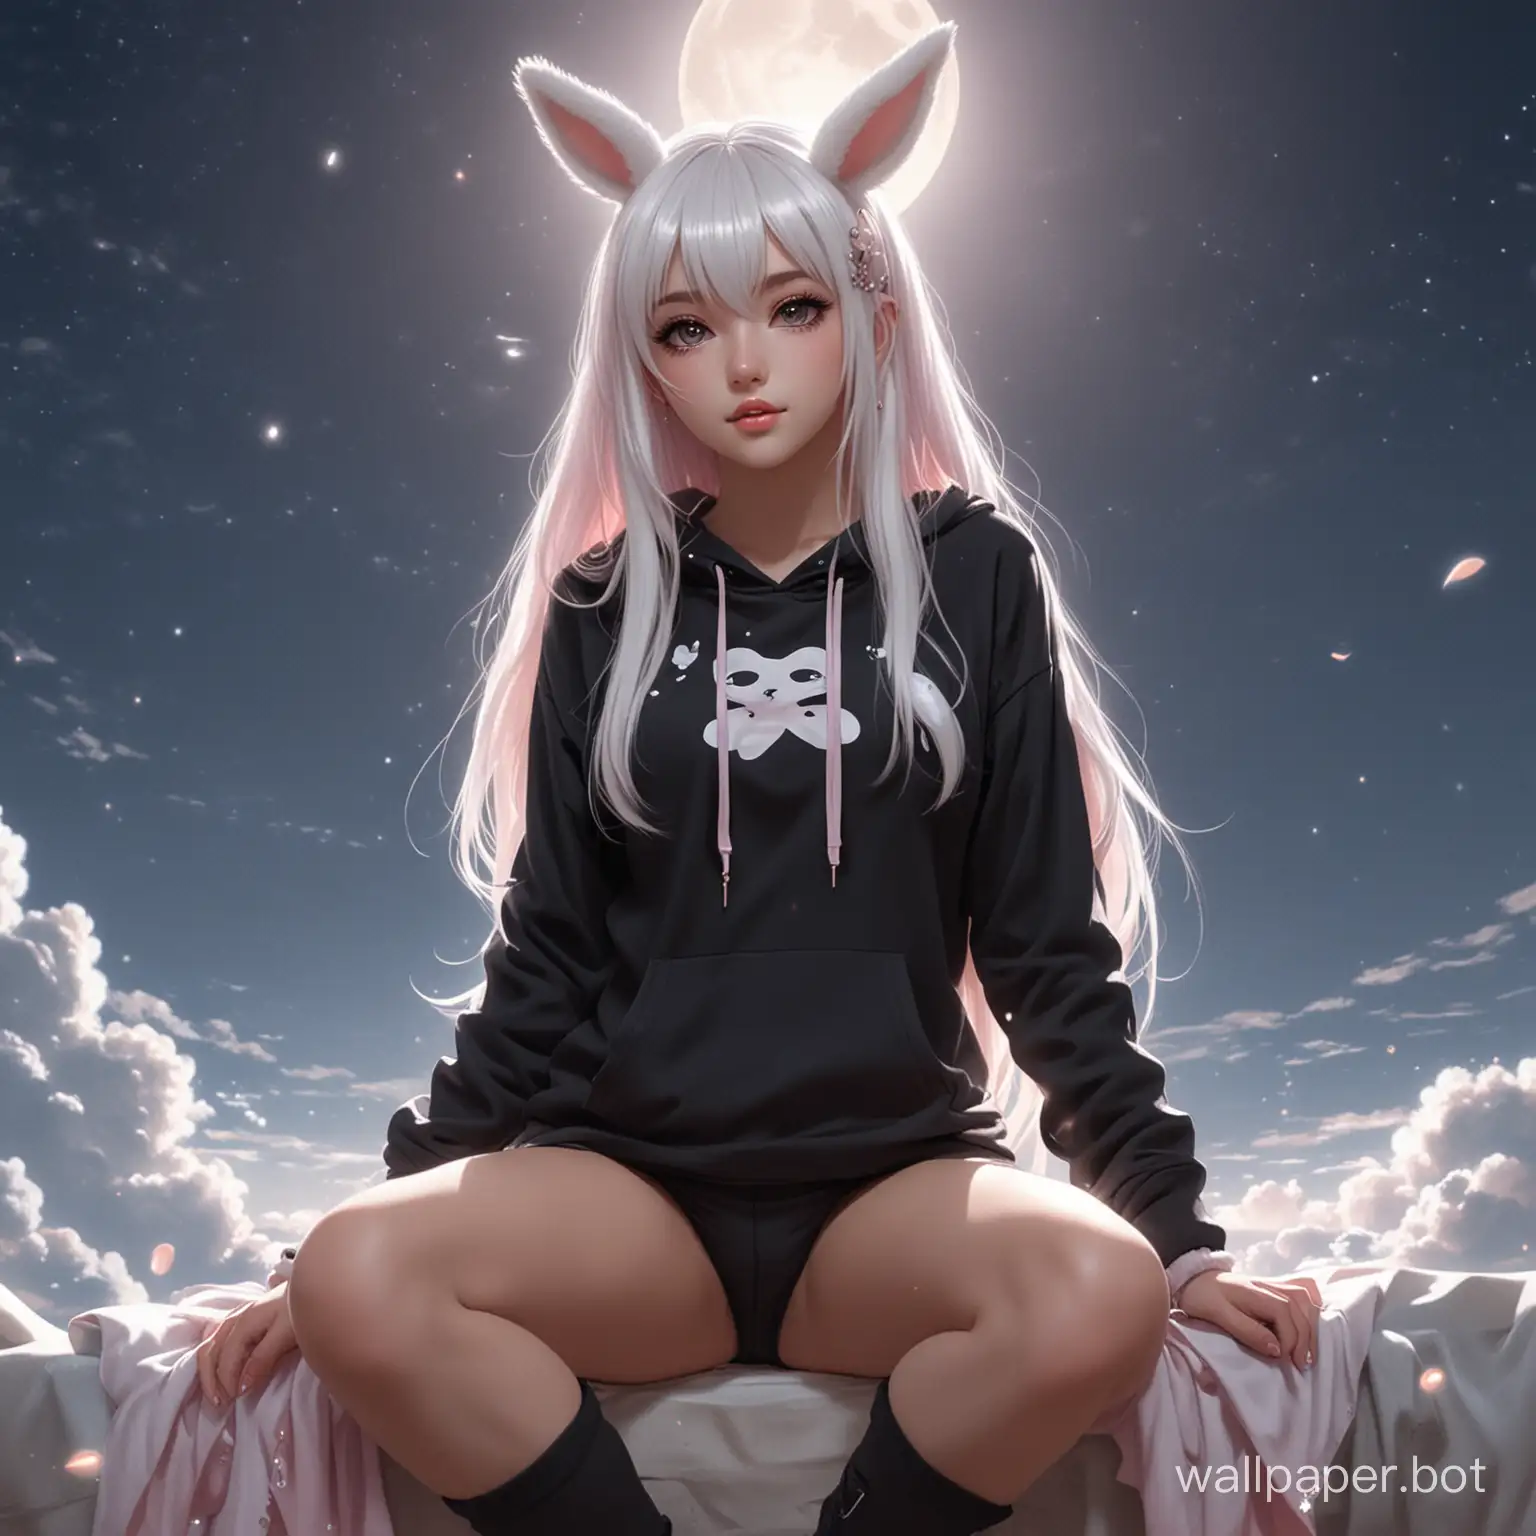 White hair goddess with bangs with big round black eyes wearing a black bunny hoodie and thigh highs and light pink beads floating under the moon, :1.2), masterpiece, 4k, best quality, anime art, glow, god rays, ethereal, dreamy, heavenly, otherworldly, dream-like, breathtaking, captivating, divine, soft focus